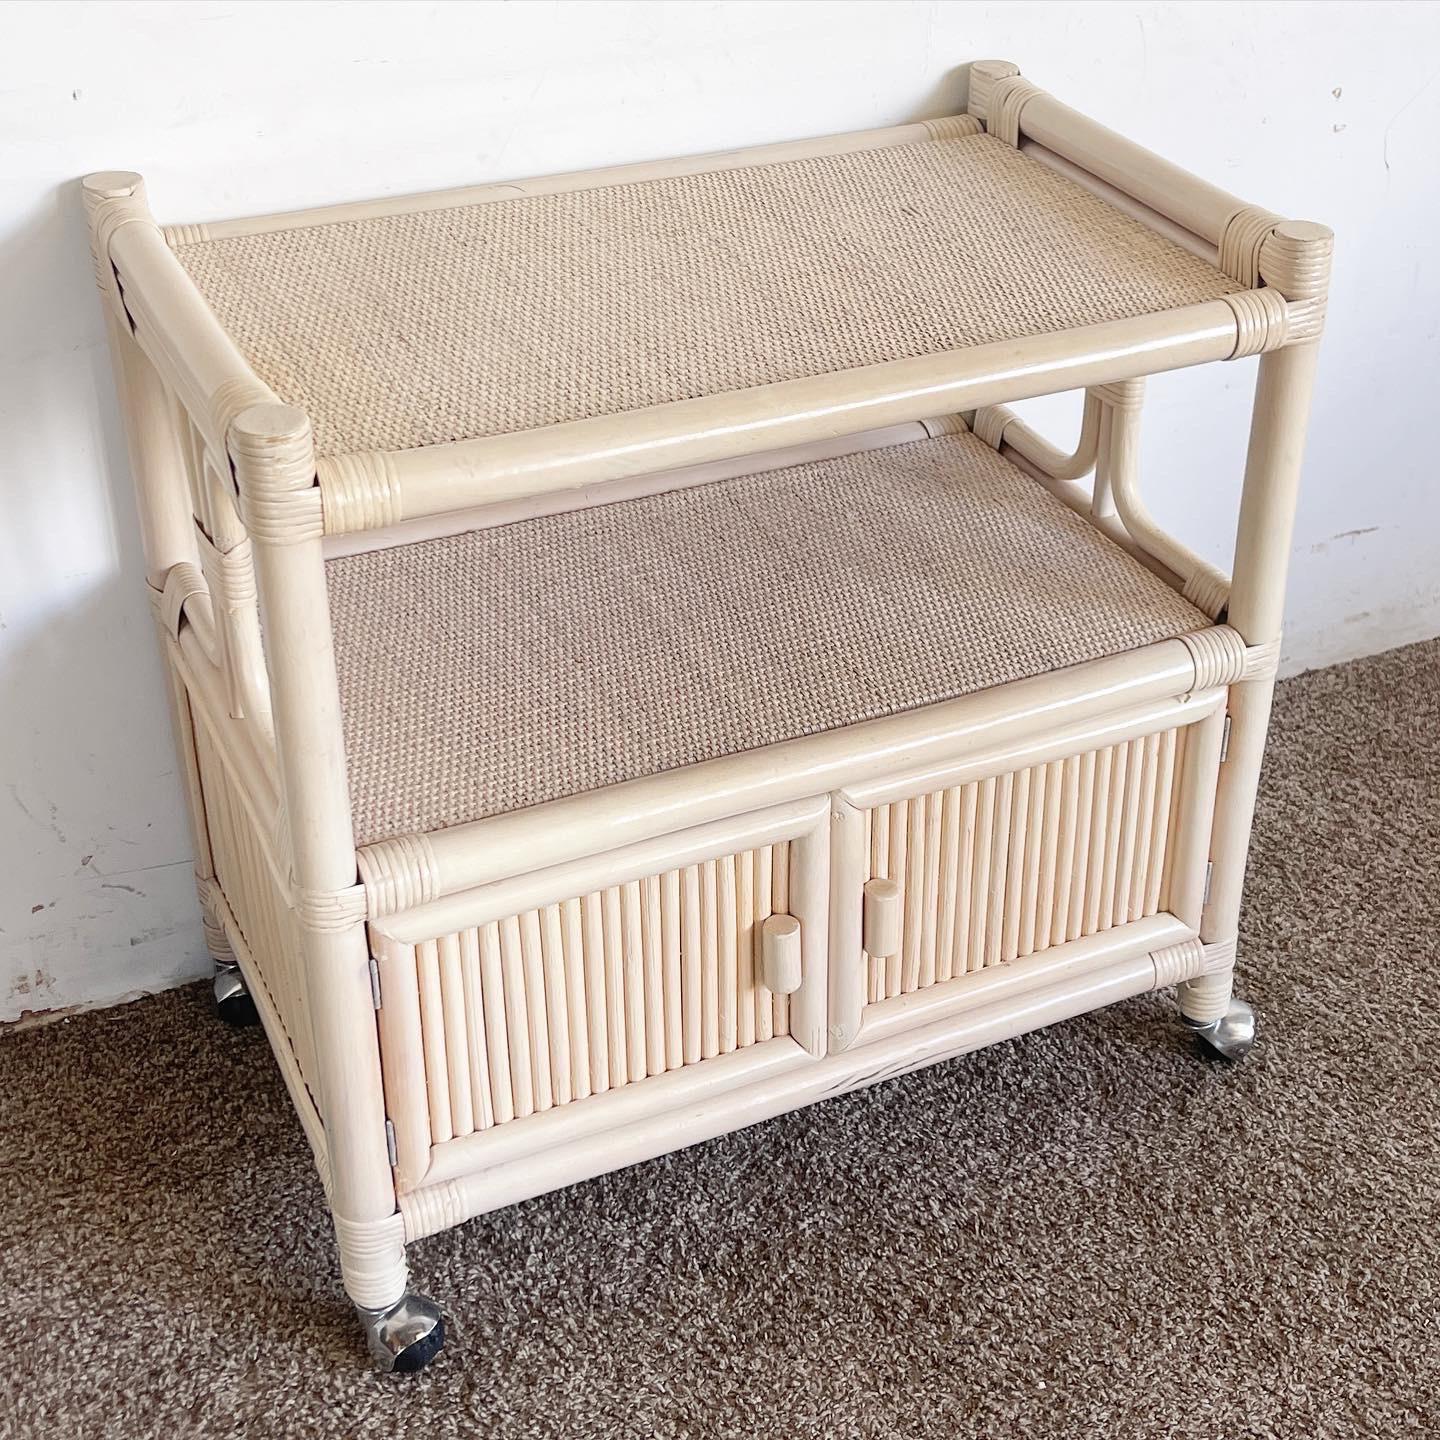 Enjoy coastal vibes with the Boho Chic White Washed Bamboo Rattan and Wicker Bar Cart, blending style, functionality, and natural charm.

Designed with a blend of natural materials like bamboo, rattan, and wicker.
White-washed finish for a relaxed,